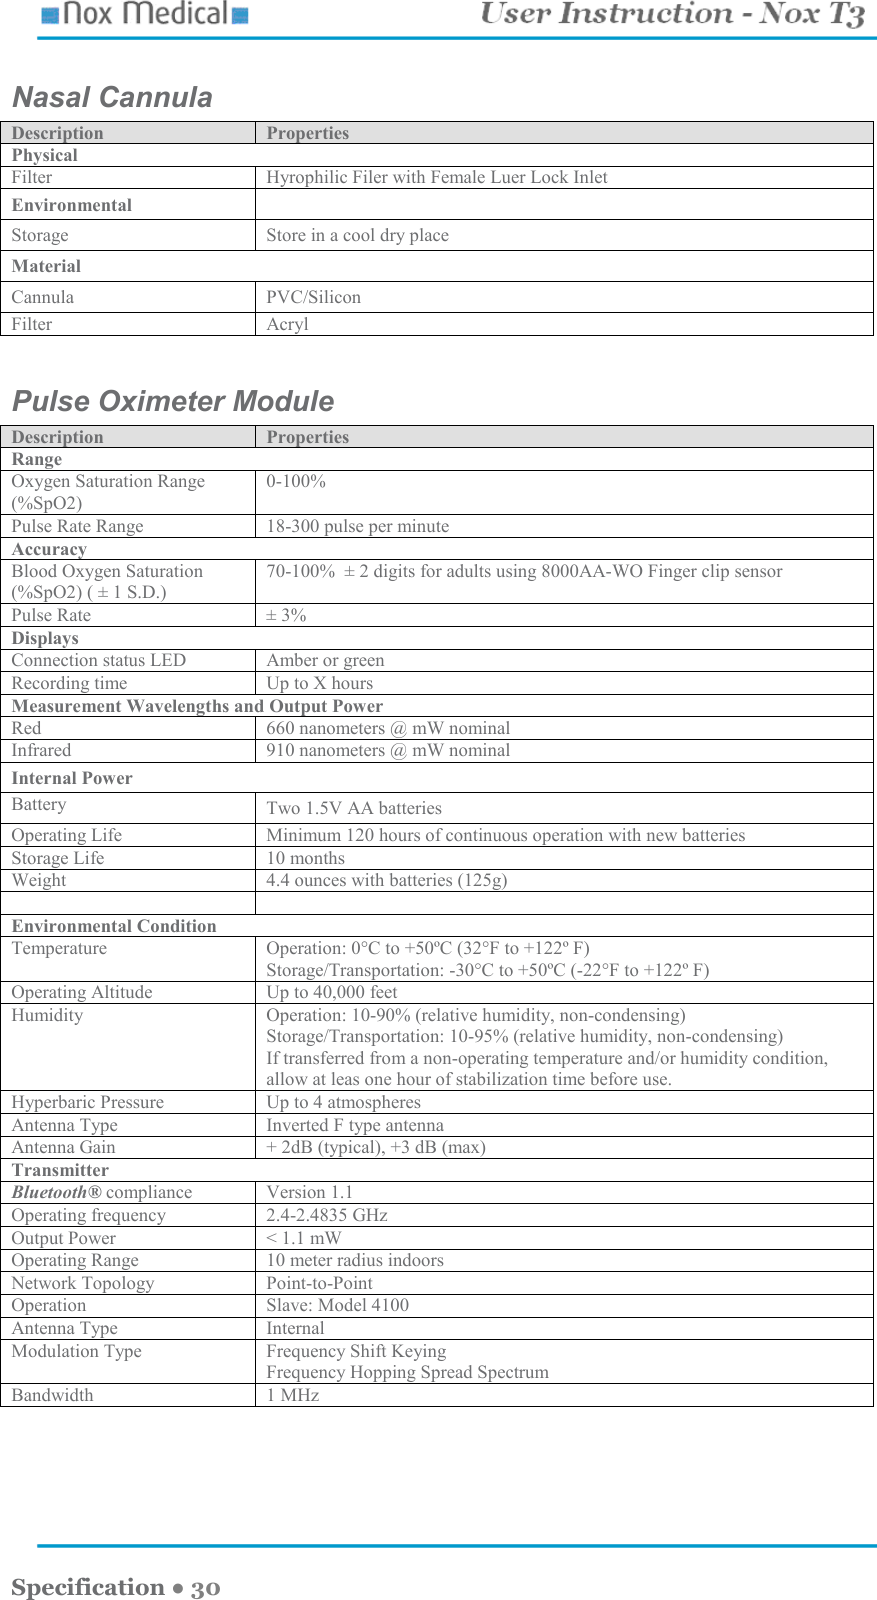    Specification ● 30 Nasal Cannula Description  Properties Physical Filter  Hyrophilic Filer with Female Luer Lock Inlet Environmental   Storage  Store in a cool dry place Material  Cannula  PVC/Silicon Filter  Acryl  Pulse Oximeter Module  Description  Properties Range Oxygen Saturation Range (%SpO2) 0-100% Pulse Rate Range  18-300 pulse per minute Accuracy Blood Oxygen Saturation (%SpO2) ( ± 1 S.D.) 70-100%  ± 2 digits for adults using 8000AA-WO Finger clip sensor Pulse Rate  ± 3% Displays Connection status LED  Amber or green Recording time  Up to X hours Measurement Wavelengths and Output Power Red  660 nanometers @ mW nominal Infrared  910 nanometers @ mW nominal Internal Power Battery  Two 1.5V AA batteries Operating Life  Minimum 120 hours of continuous operation with new batteries Storage Life  10 months Weight  4.4 ounces with batteries (125g)    Environmental Condition Temperature  Operation: 0°C to +50ºC (32°F to +122º F) Storage/Transportation: -30°C to +50ºC (-22°F to +122º F) Operating Altitude  Up to 40,000 feet Humidity  Operation: 10-90% (relative humidity, non-condensing) Storage/Transportation: 10-95% (relative humidity, non-condensing) If transferred from a non-operating temperature and/or humidity condition, allow at leas one hour of stabilization time before use. Hyperbaric Pressure  Up to 4 atmospheres Antenna Type  Inverted F type antenna Antenna Gain  + 2dB (typical), +3 dB (max) Transmitter  Bluetooth® compliance  Version 1.1  Operating frequency  2.4-2.4835 GHz Output Power  &lt; 1.1 mW Operating Range  10 meter radius indoors Network Topology  Point-to-Point Operation  Slave: Model 4100 Antenna Type  Internal Modulation Type  Frequency Shift Keying Frequency Hopping Spread Spectrum Bandwidth  1 MHz  